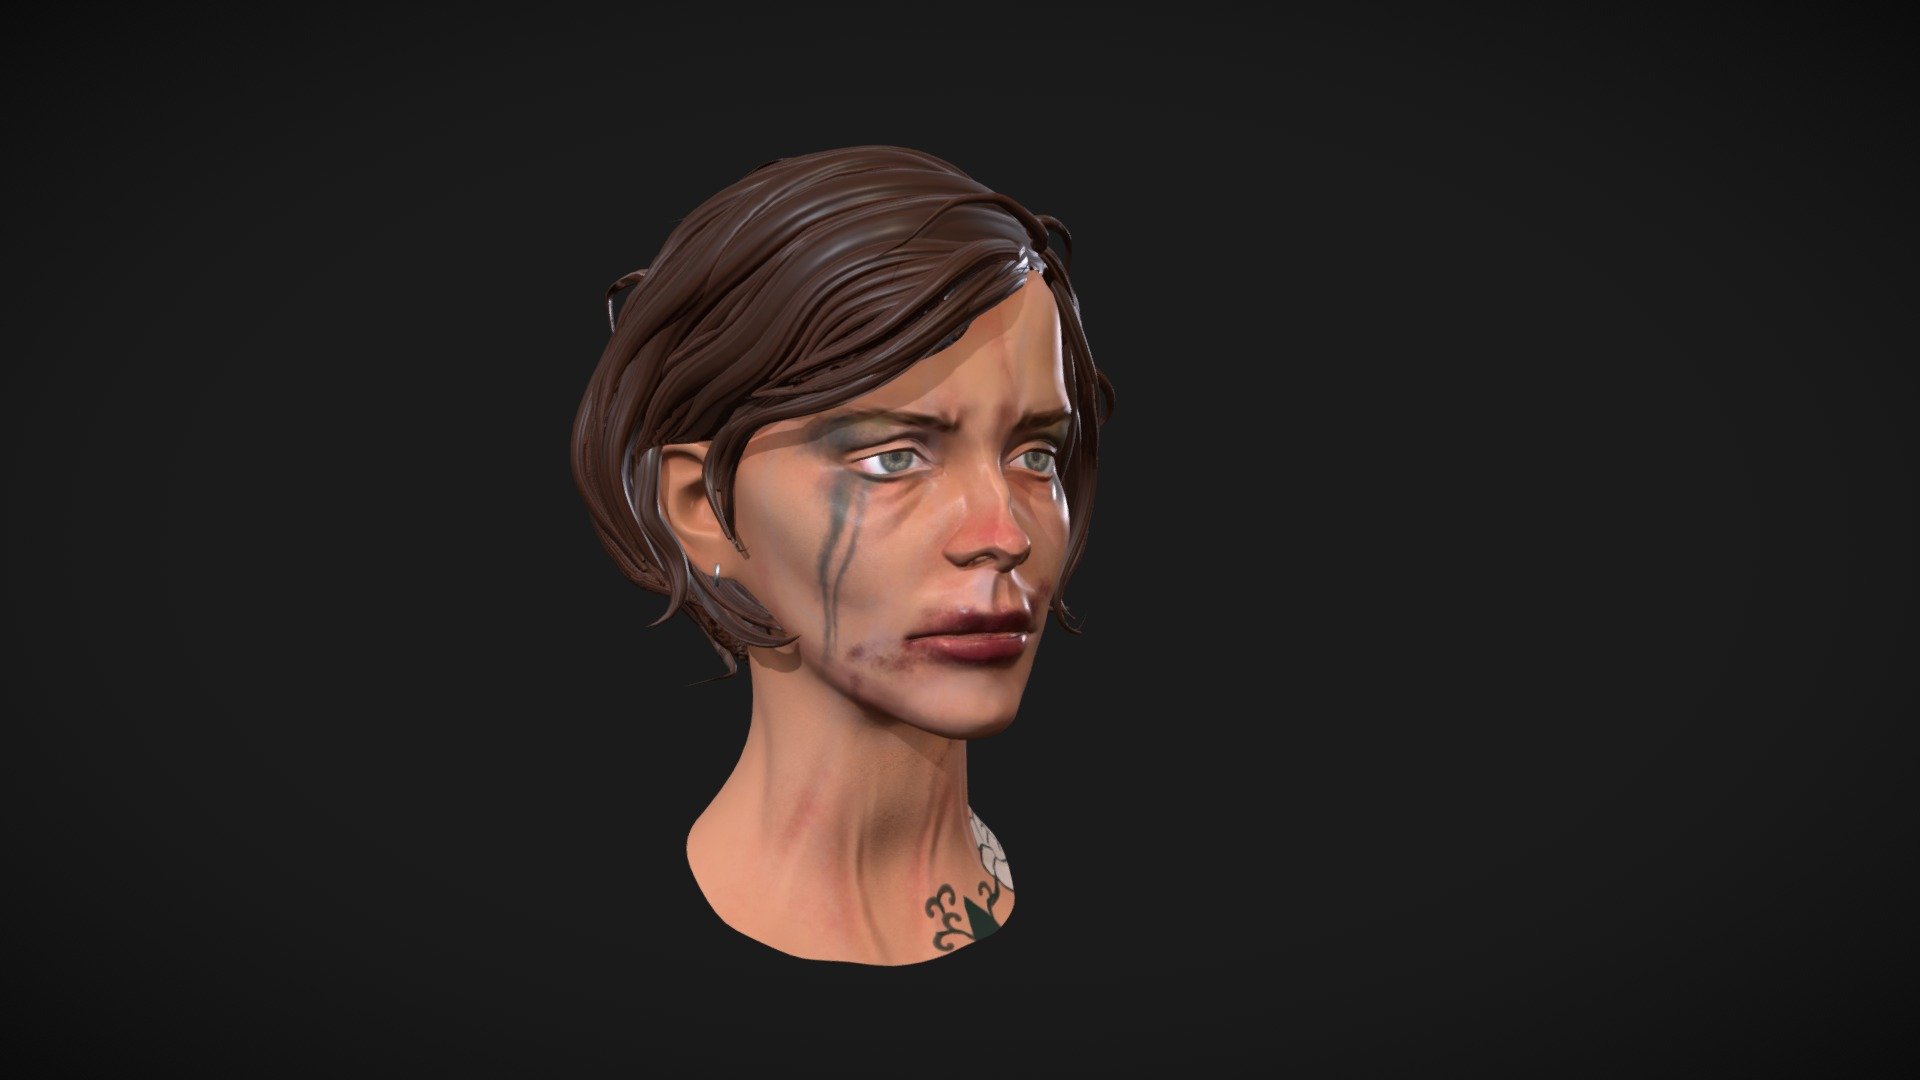 For our assignment of Character Creation I made a head based on the concept art of dishonored. 
Sculpted in Zbrush, retopo in 3DS Max and textured in Substance 3D Painter 3d model